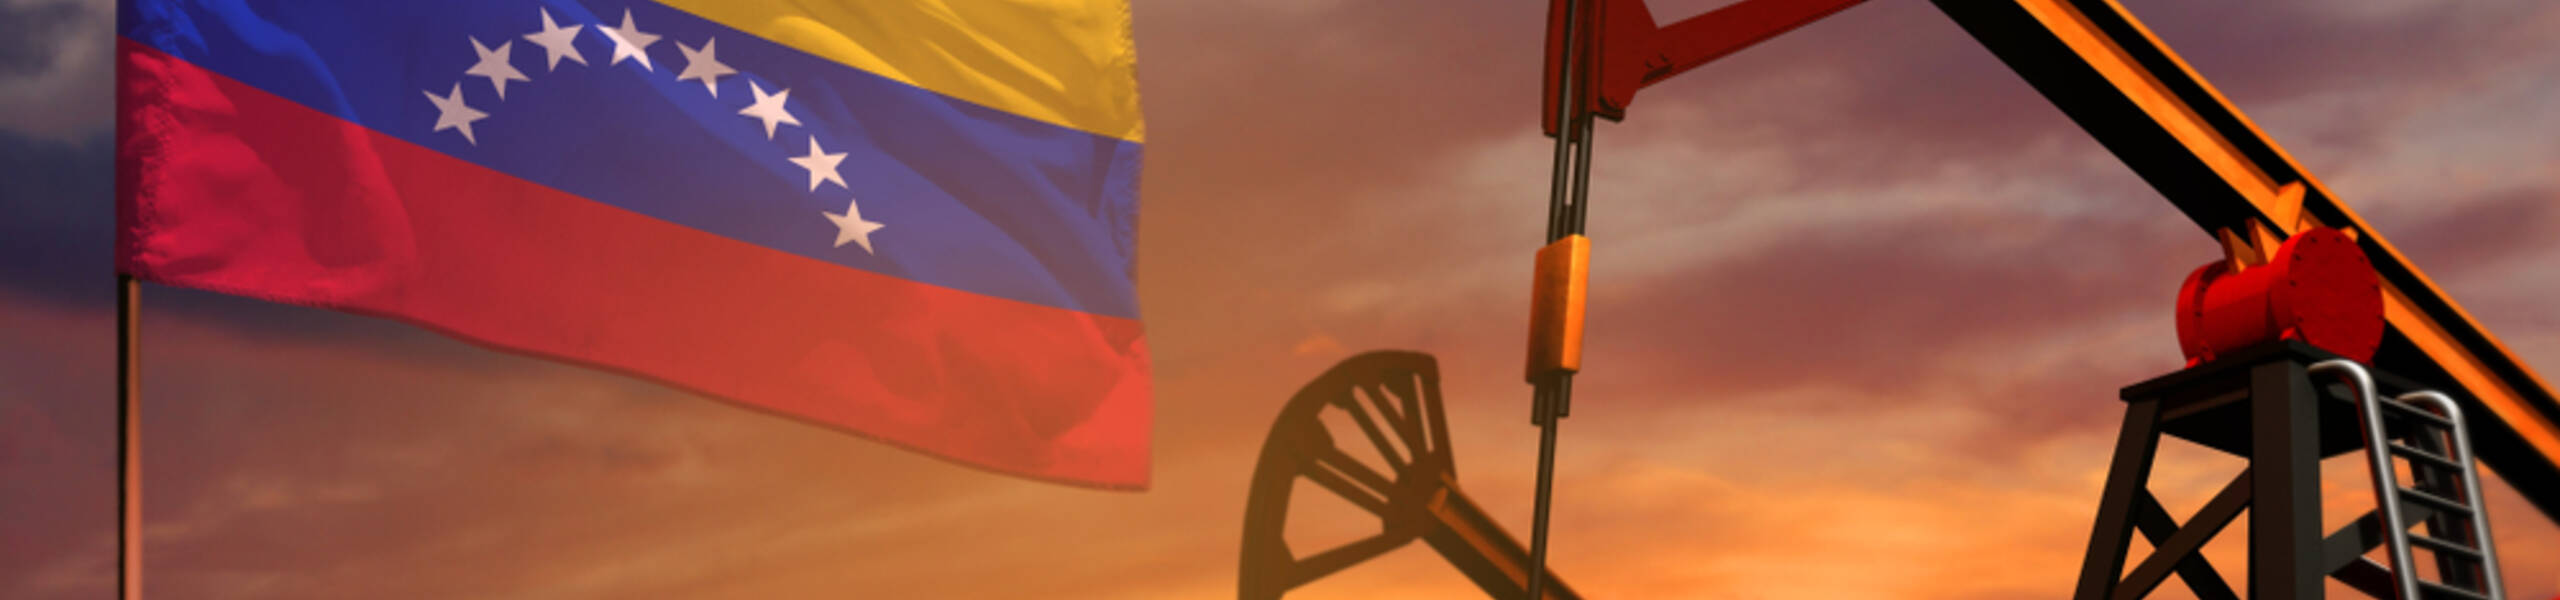 Venezuela: real chances for global oil prices?